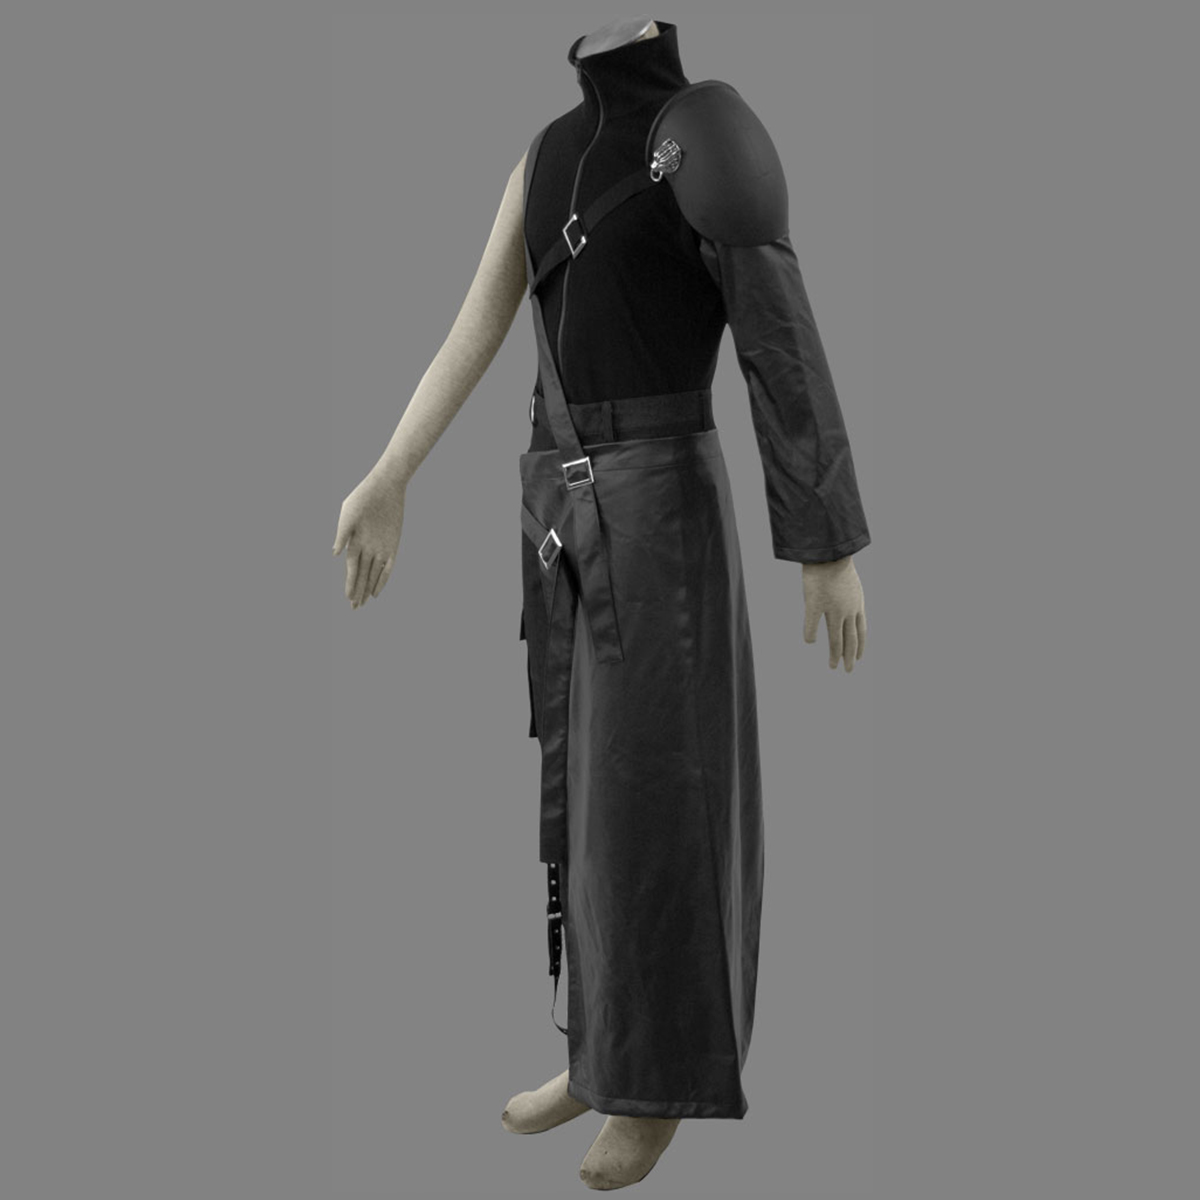 Final Fantasy VII Cloud Strife Anime Cosplay Costumes Outfit